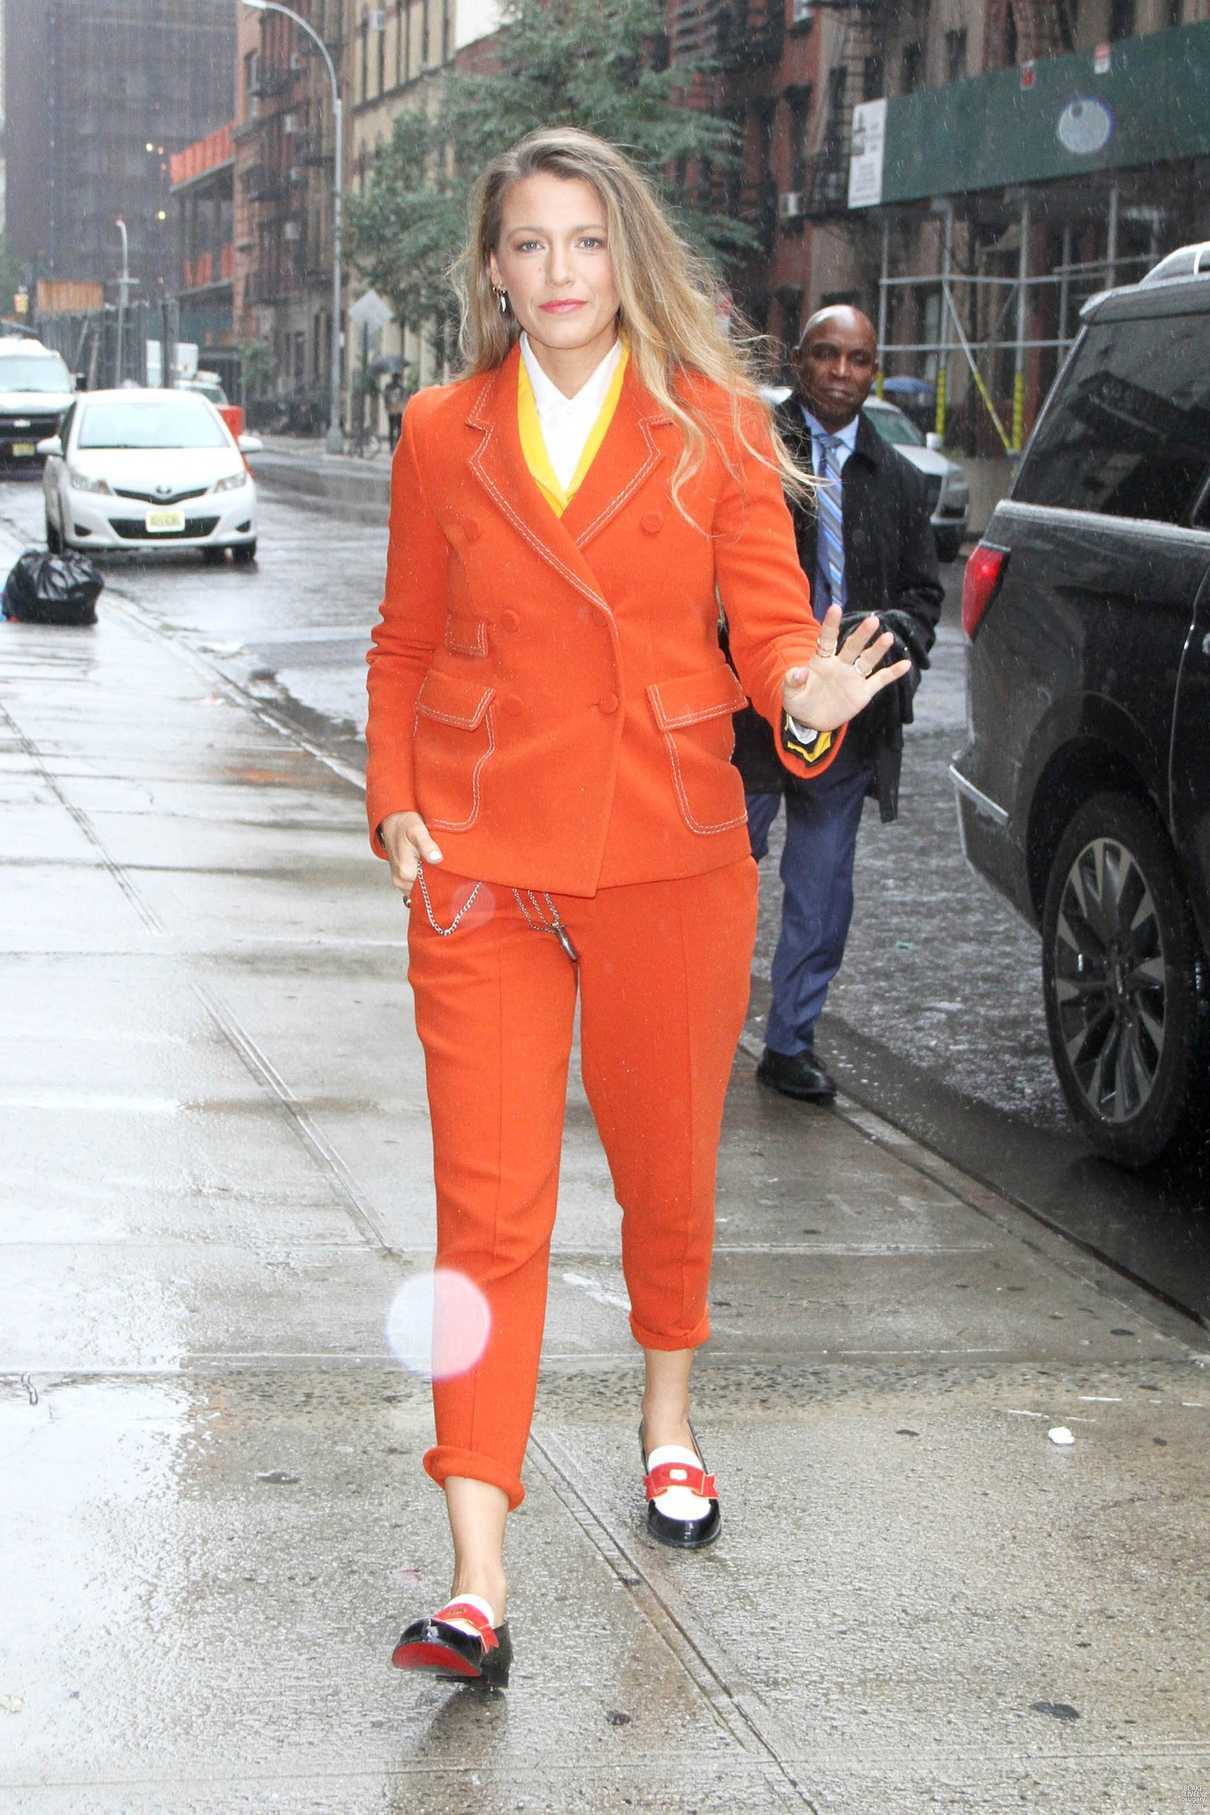 Blake Lively in an Orange Suit